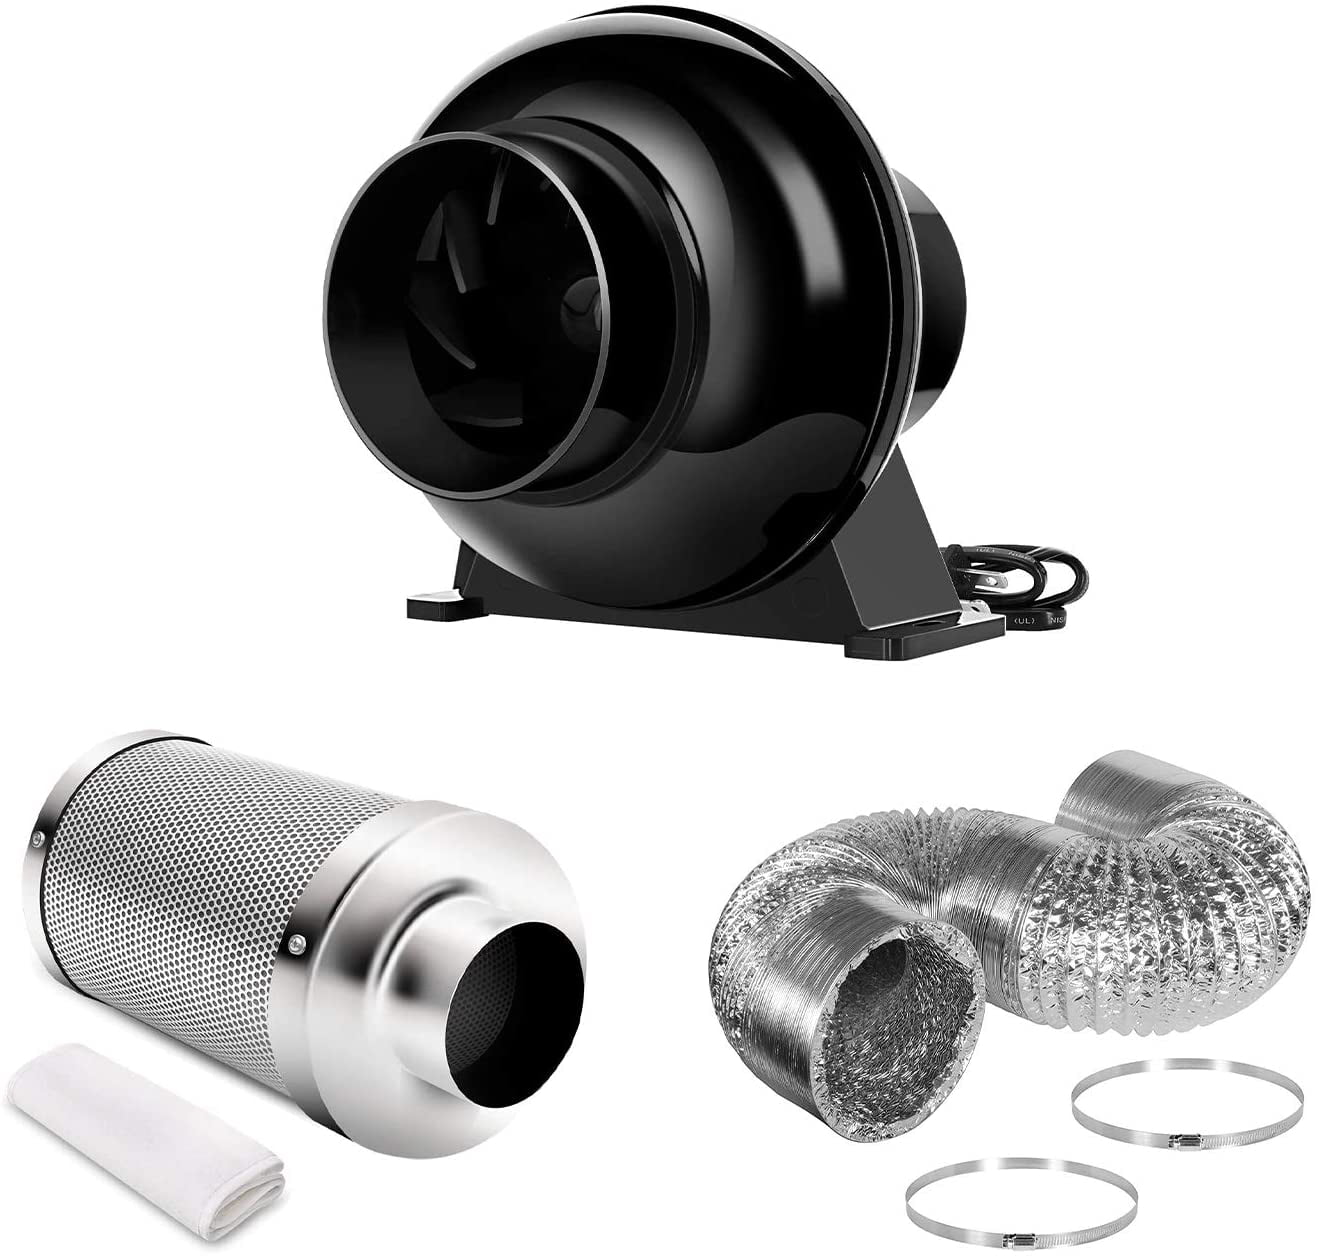 Silver iPower 4 Inch Air Carbon Filter 8 Feet Ducting 190 CFM Inline Fan Combo with Variable Speed Controller Rope Hanger and Humidity Monitor for Grow Tent Ventilation 